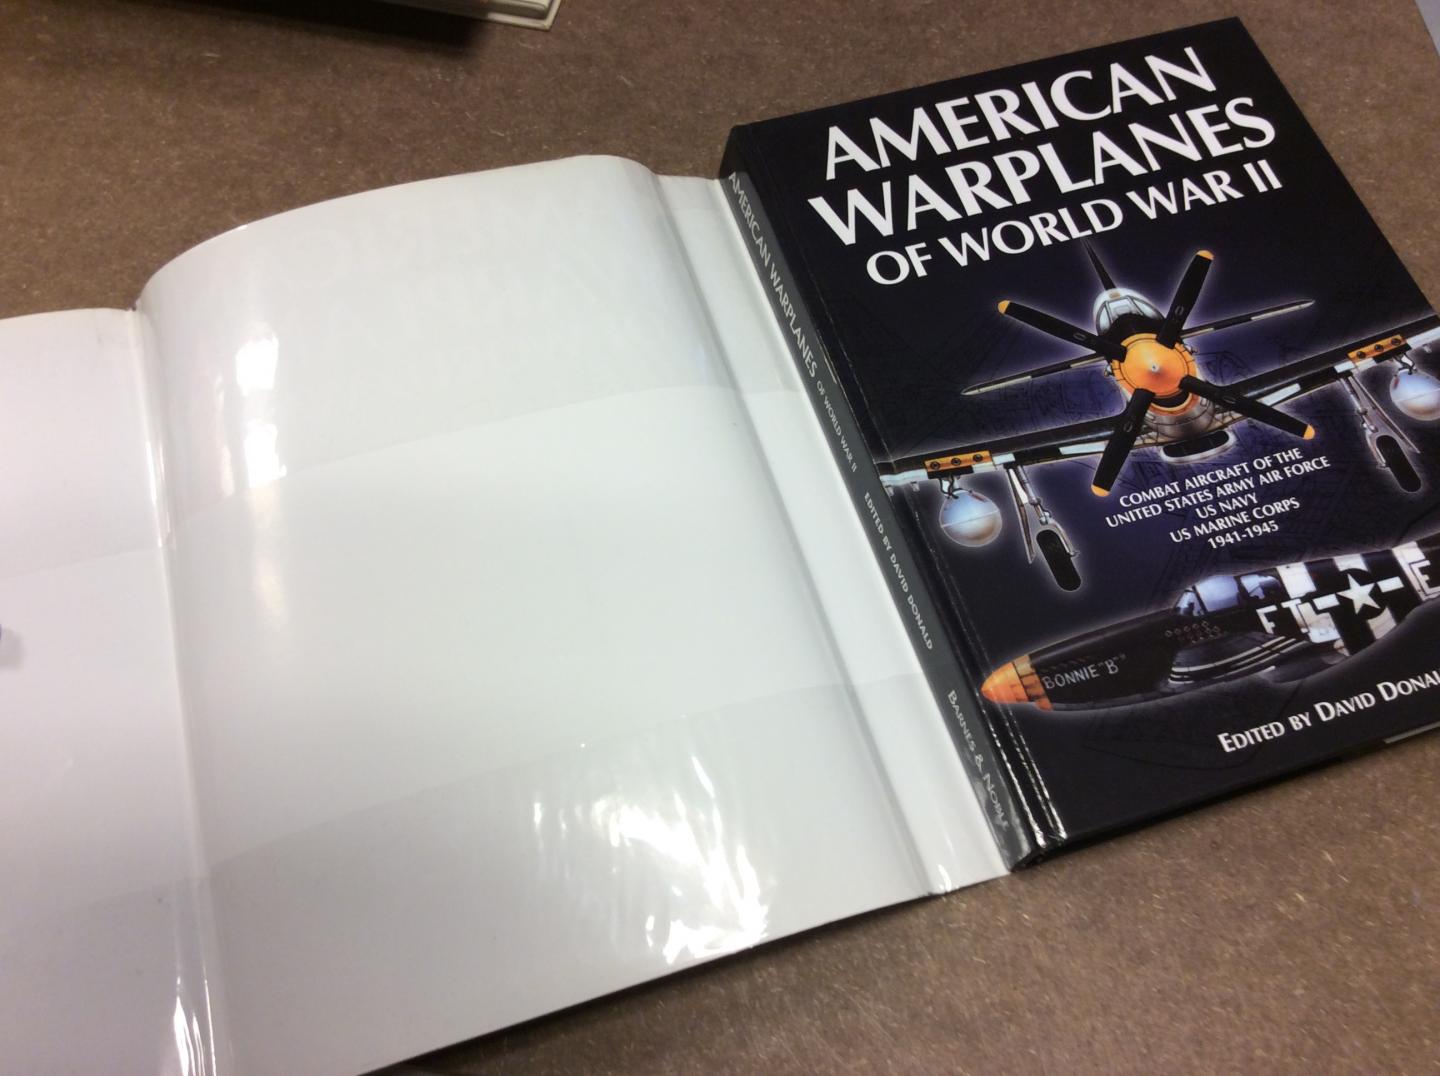 Donald, David (editor) - American Warplanes of World War II. Combat Aircraft of the United States Army Air Force, US Navy, US Marine Corps 1941-1945